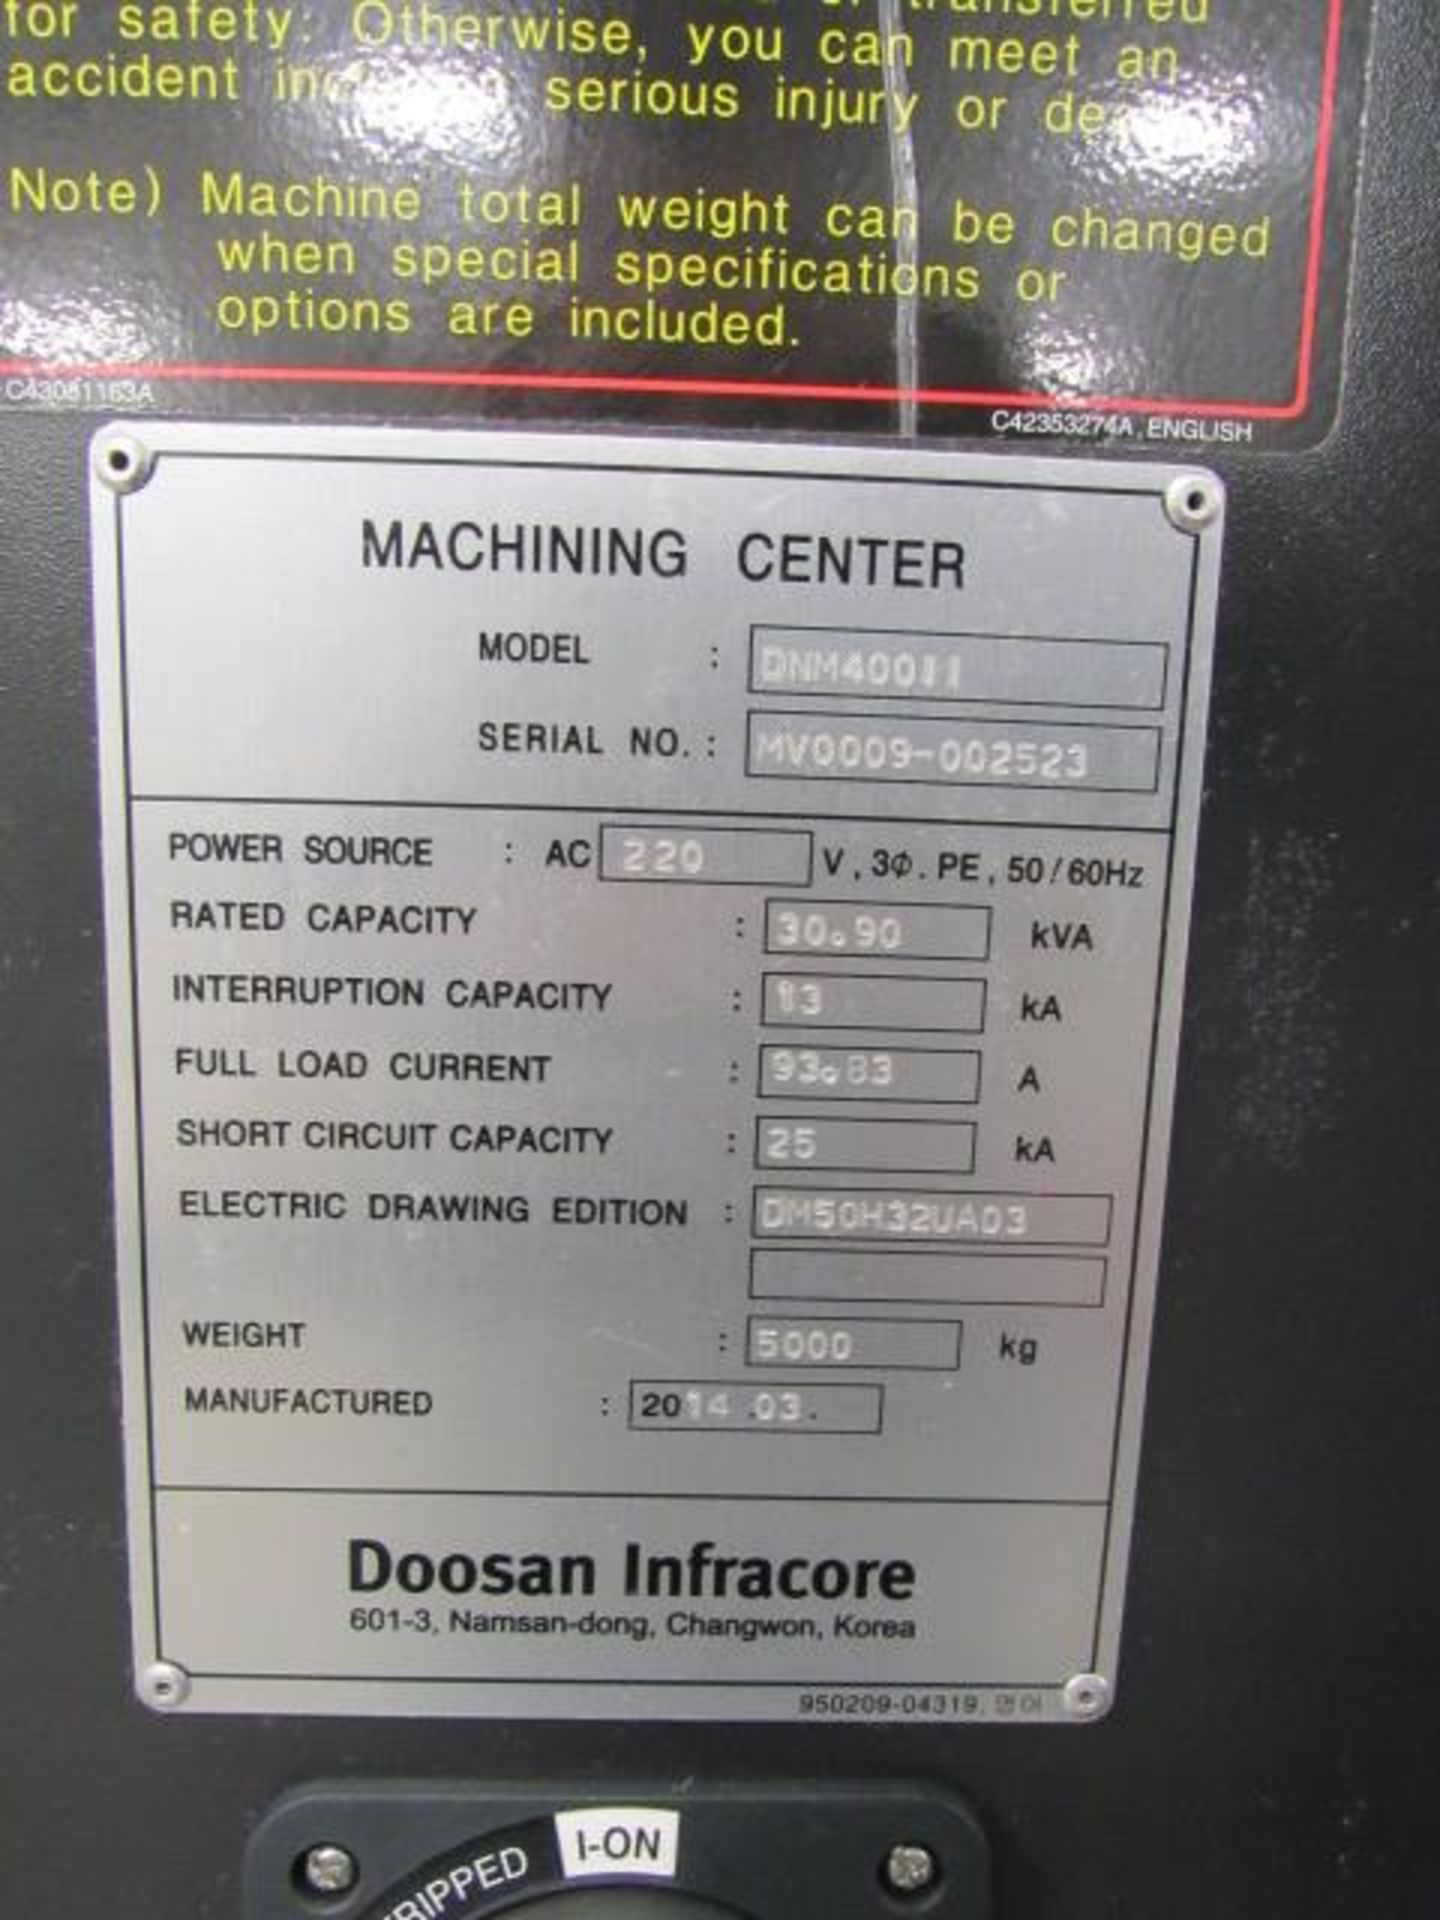 Doosan DNM400II CNC Vertical Machining Center with 36.2'' x 17.1'' Table, Big Plus #40, Spindle - Image 8 of 9